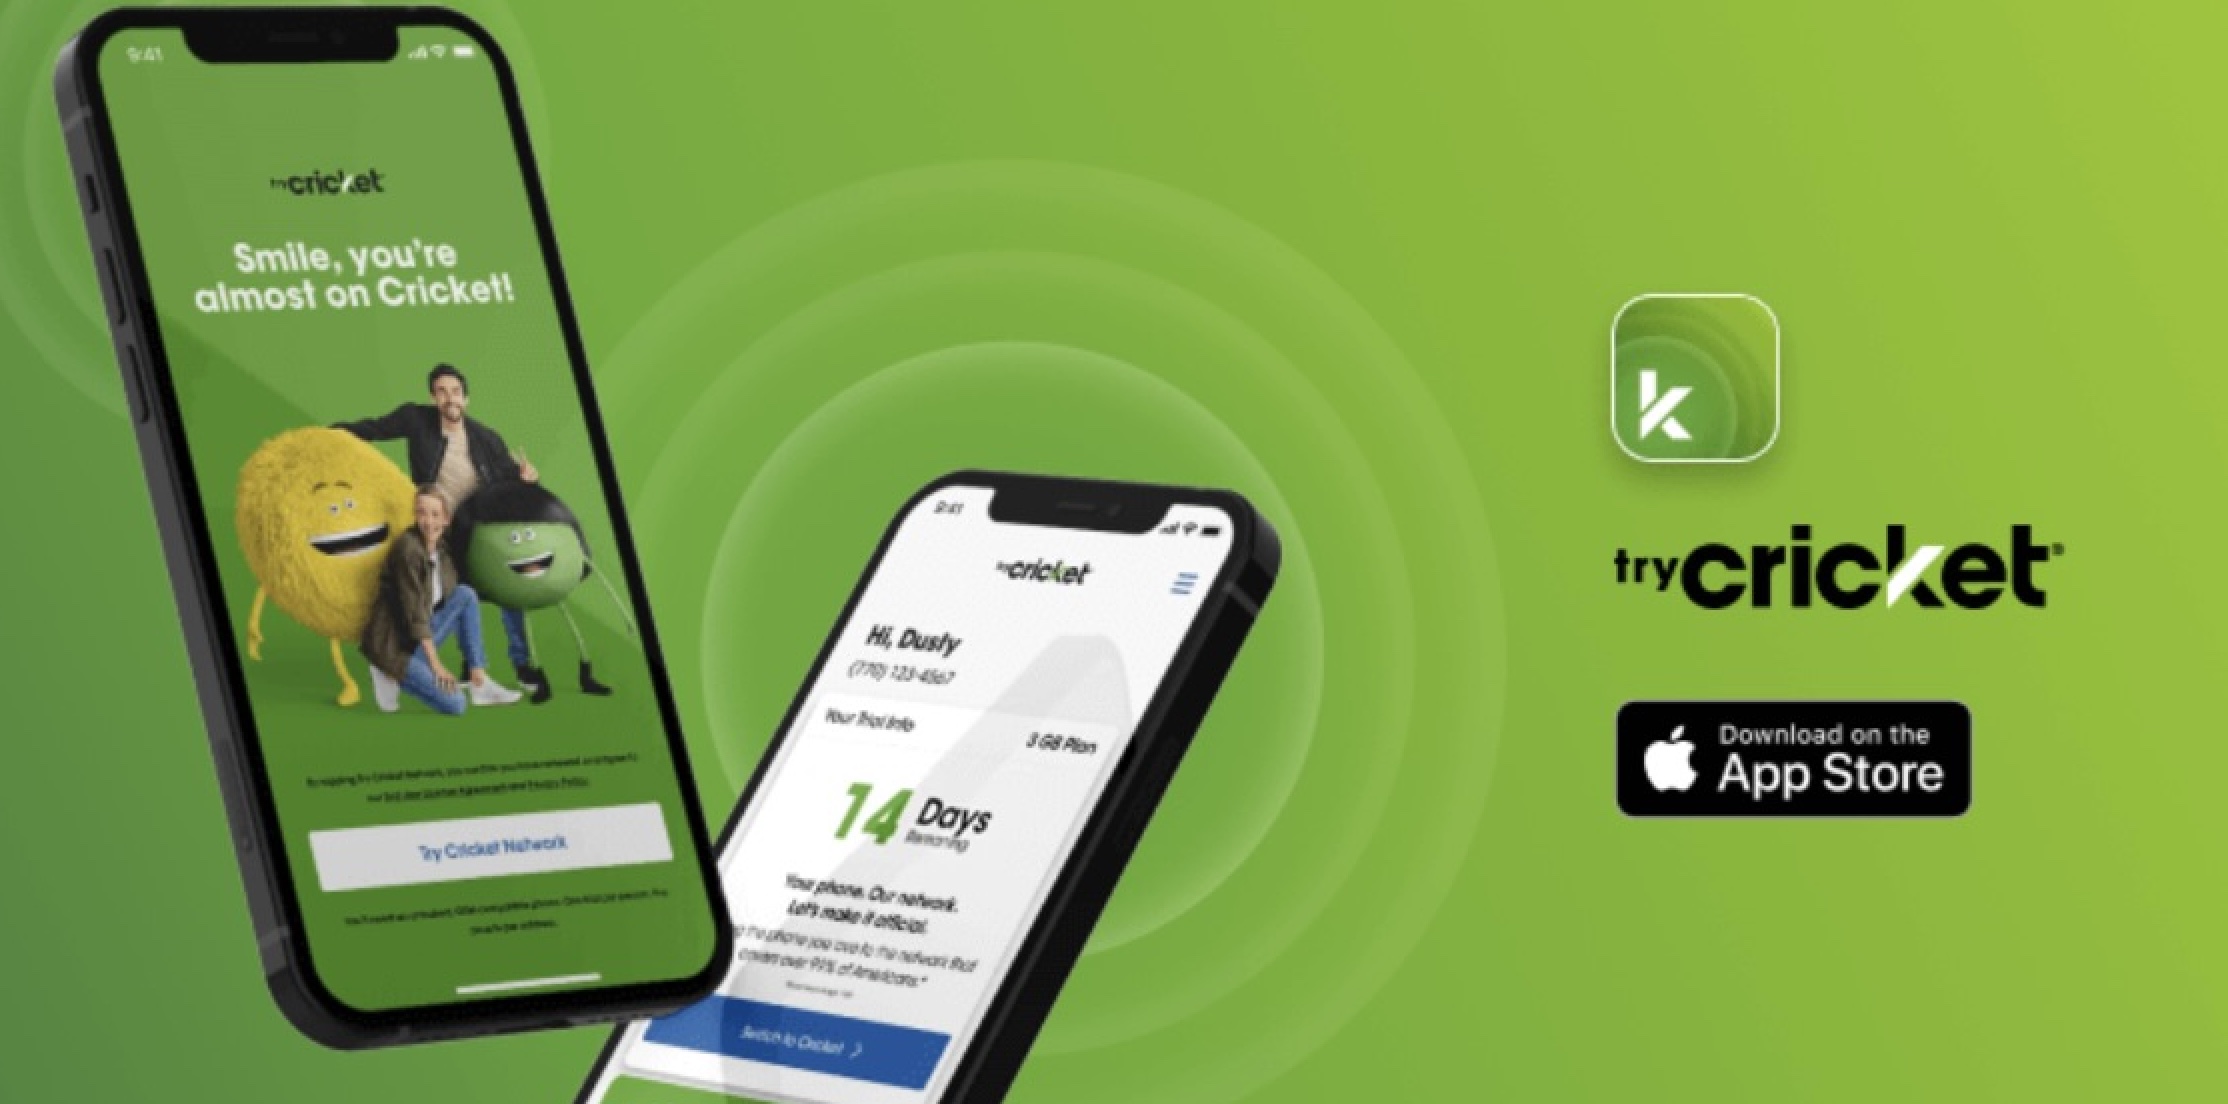 Cricket Wireless launches two-week free eSIM trials on iPhone to entice switchers